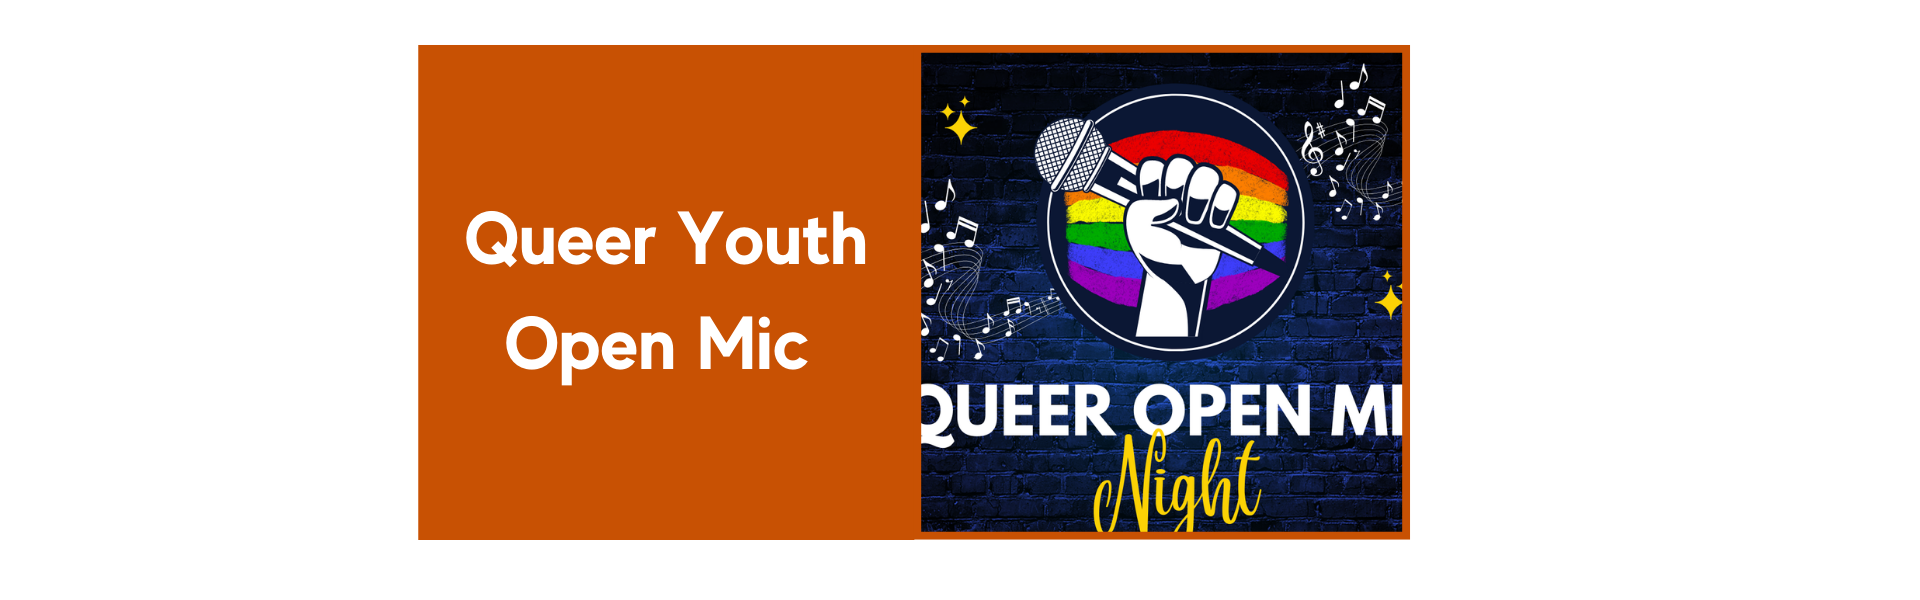 Queer-Youth-Open-Mic.png